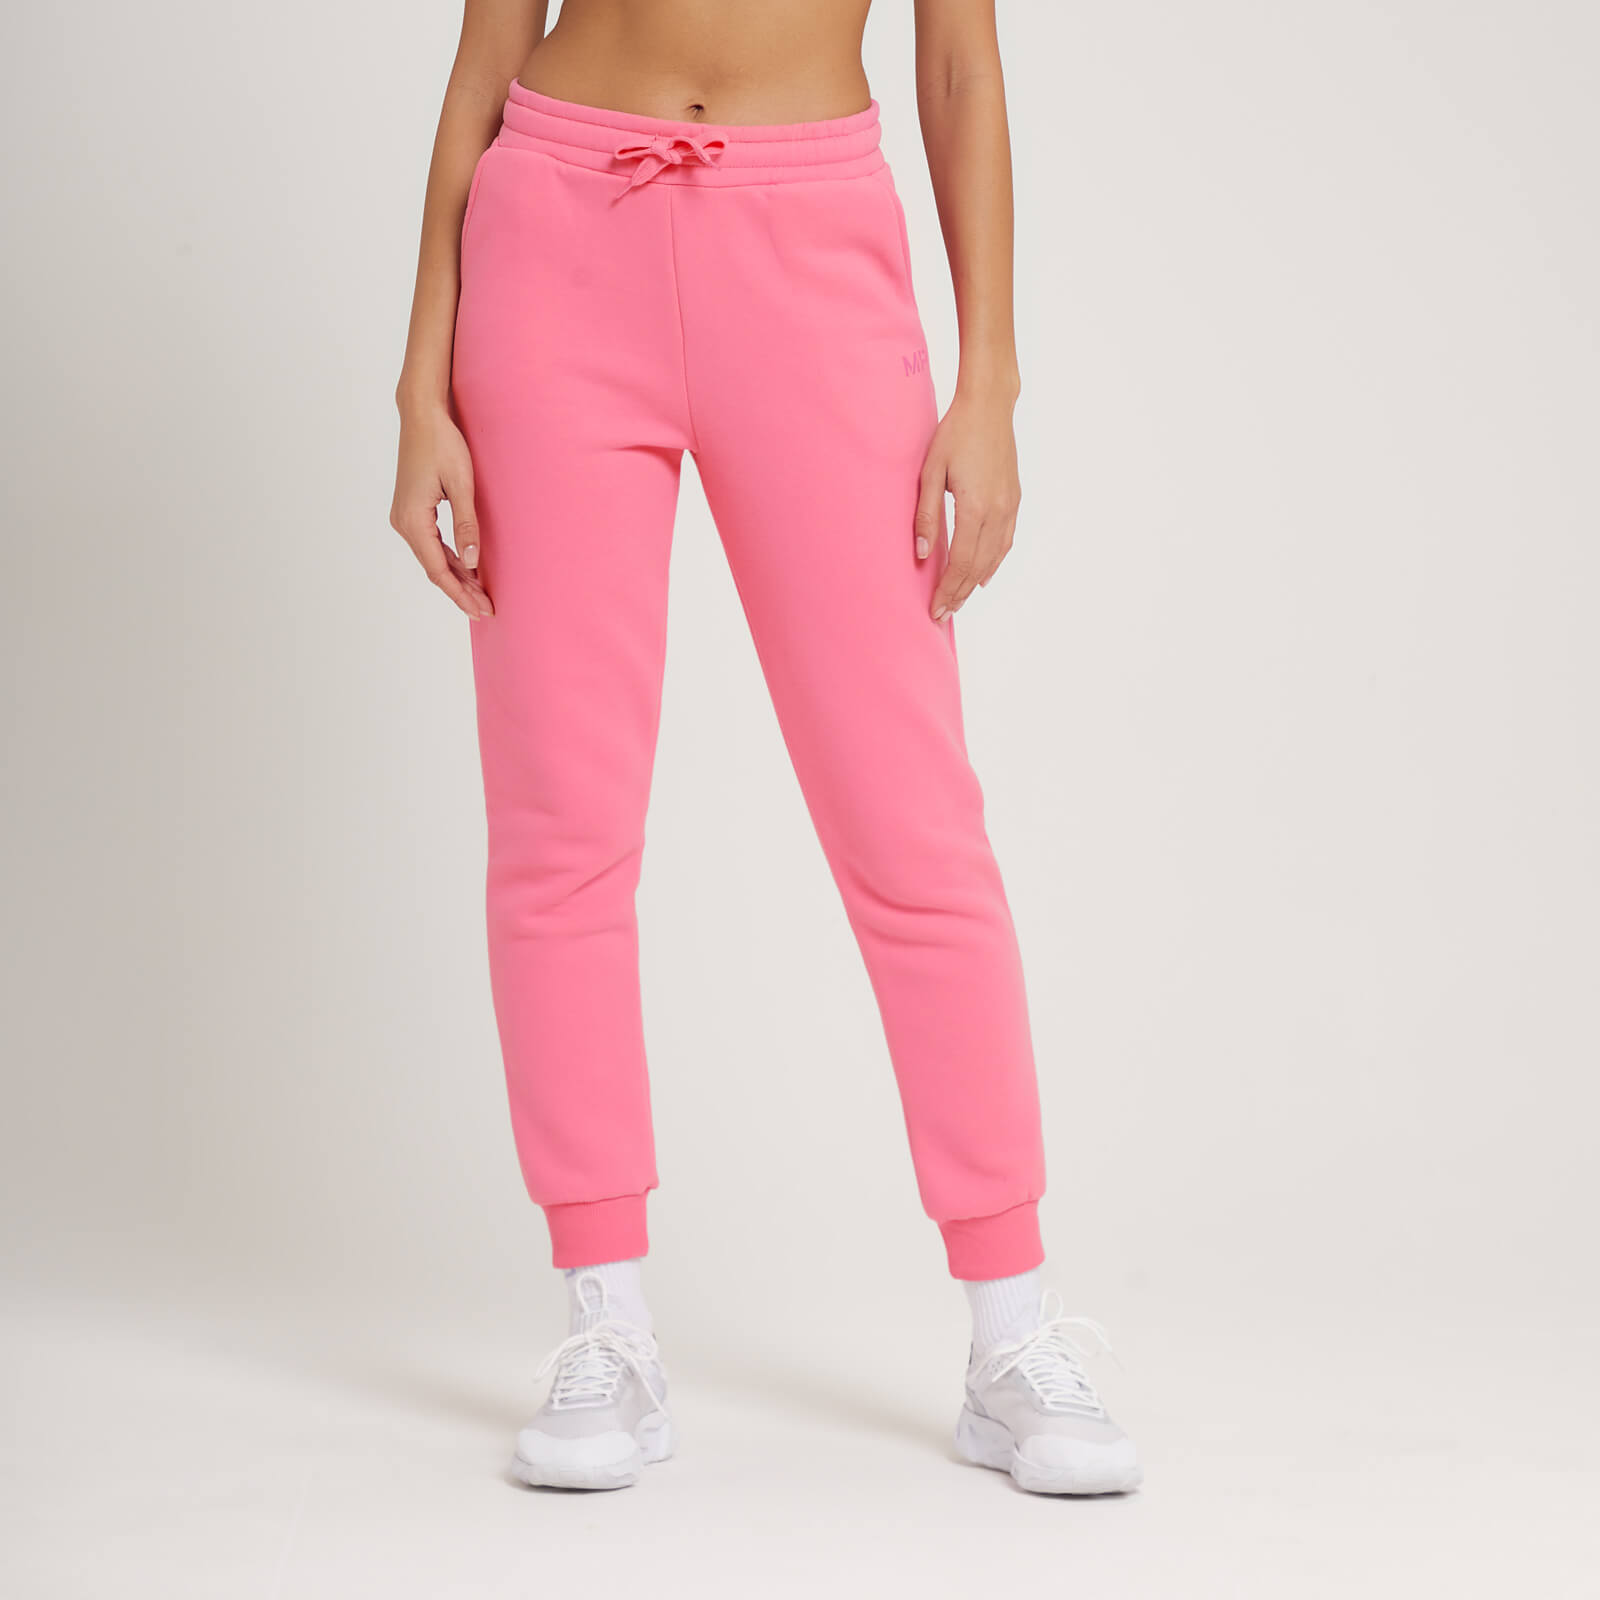 MP Women's Fade Graphic Jogger - Candy Floss